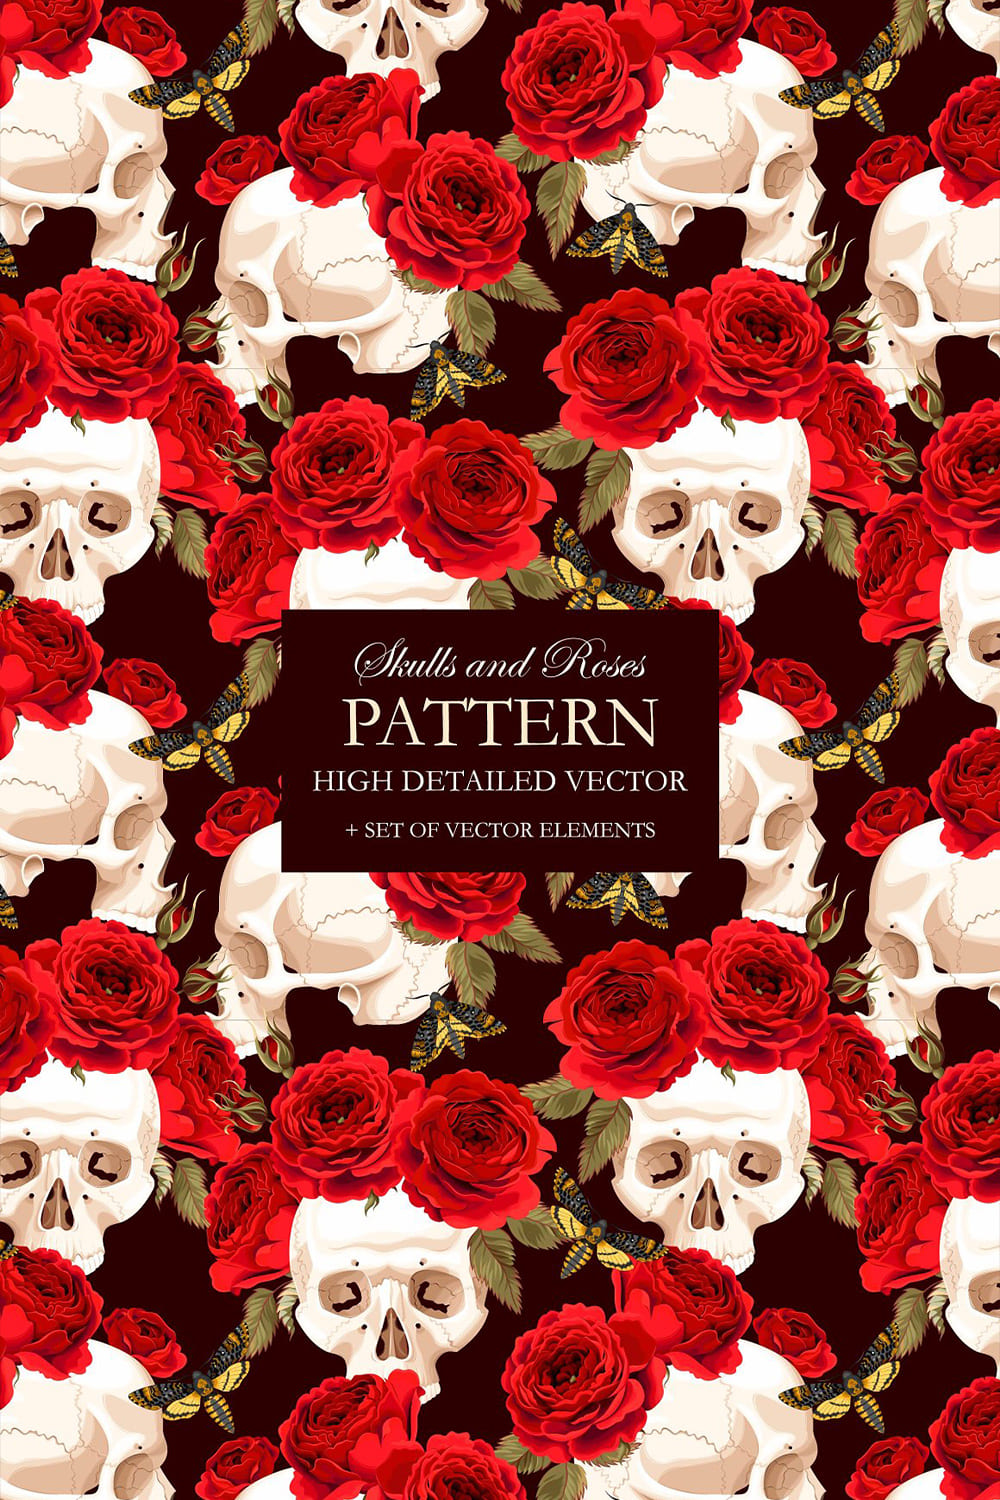 Pattern with Skulls and Roses pinterest image.